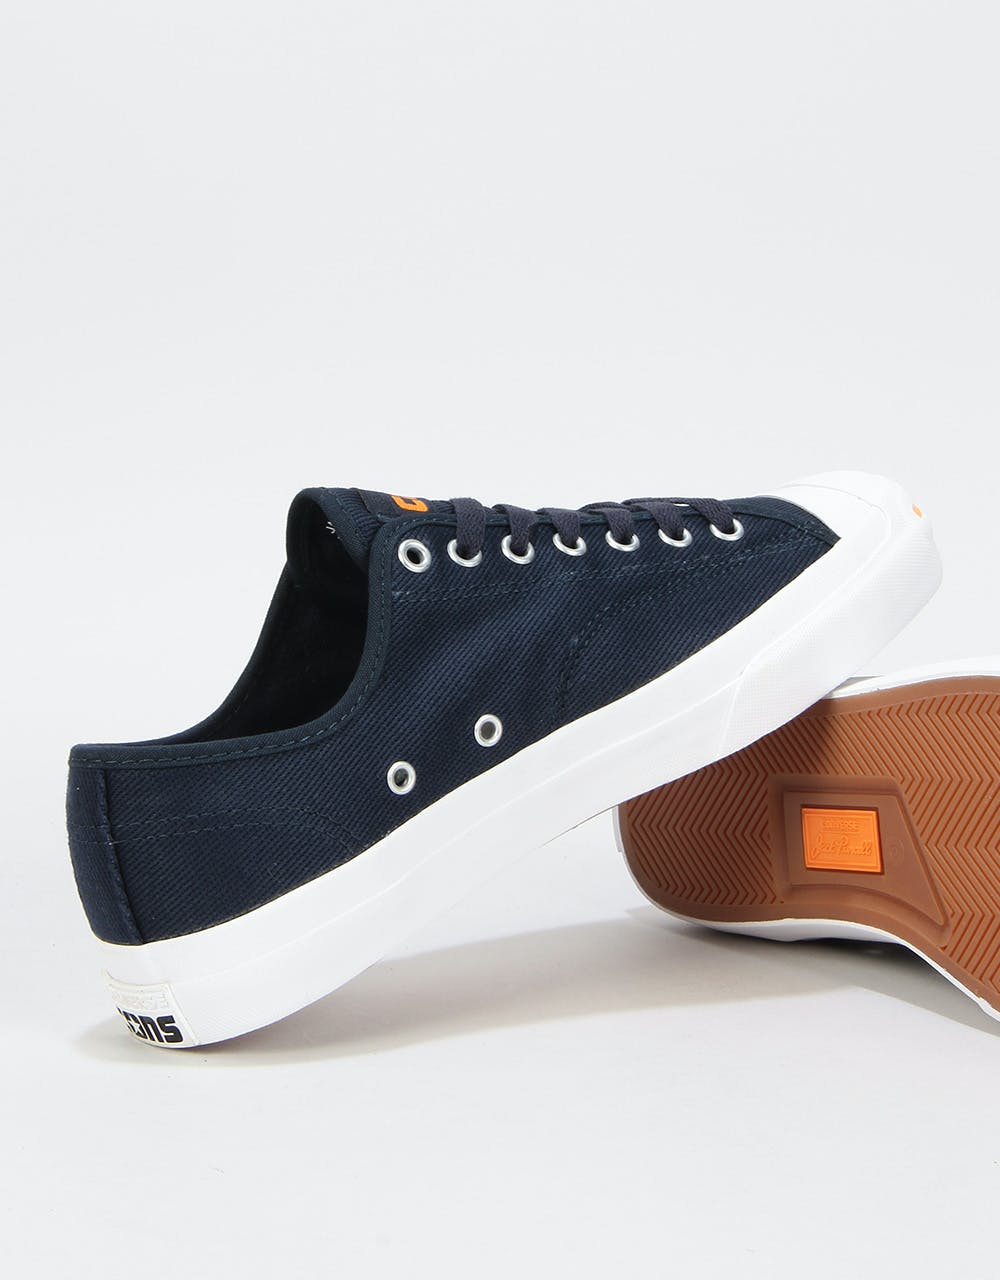 Converse Jack Purcell Pro Ox Skate Shoes - Dark Obsidian/White